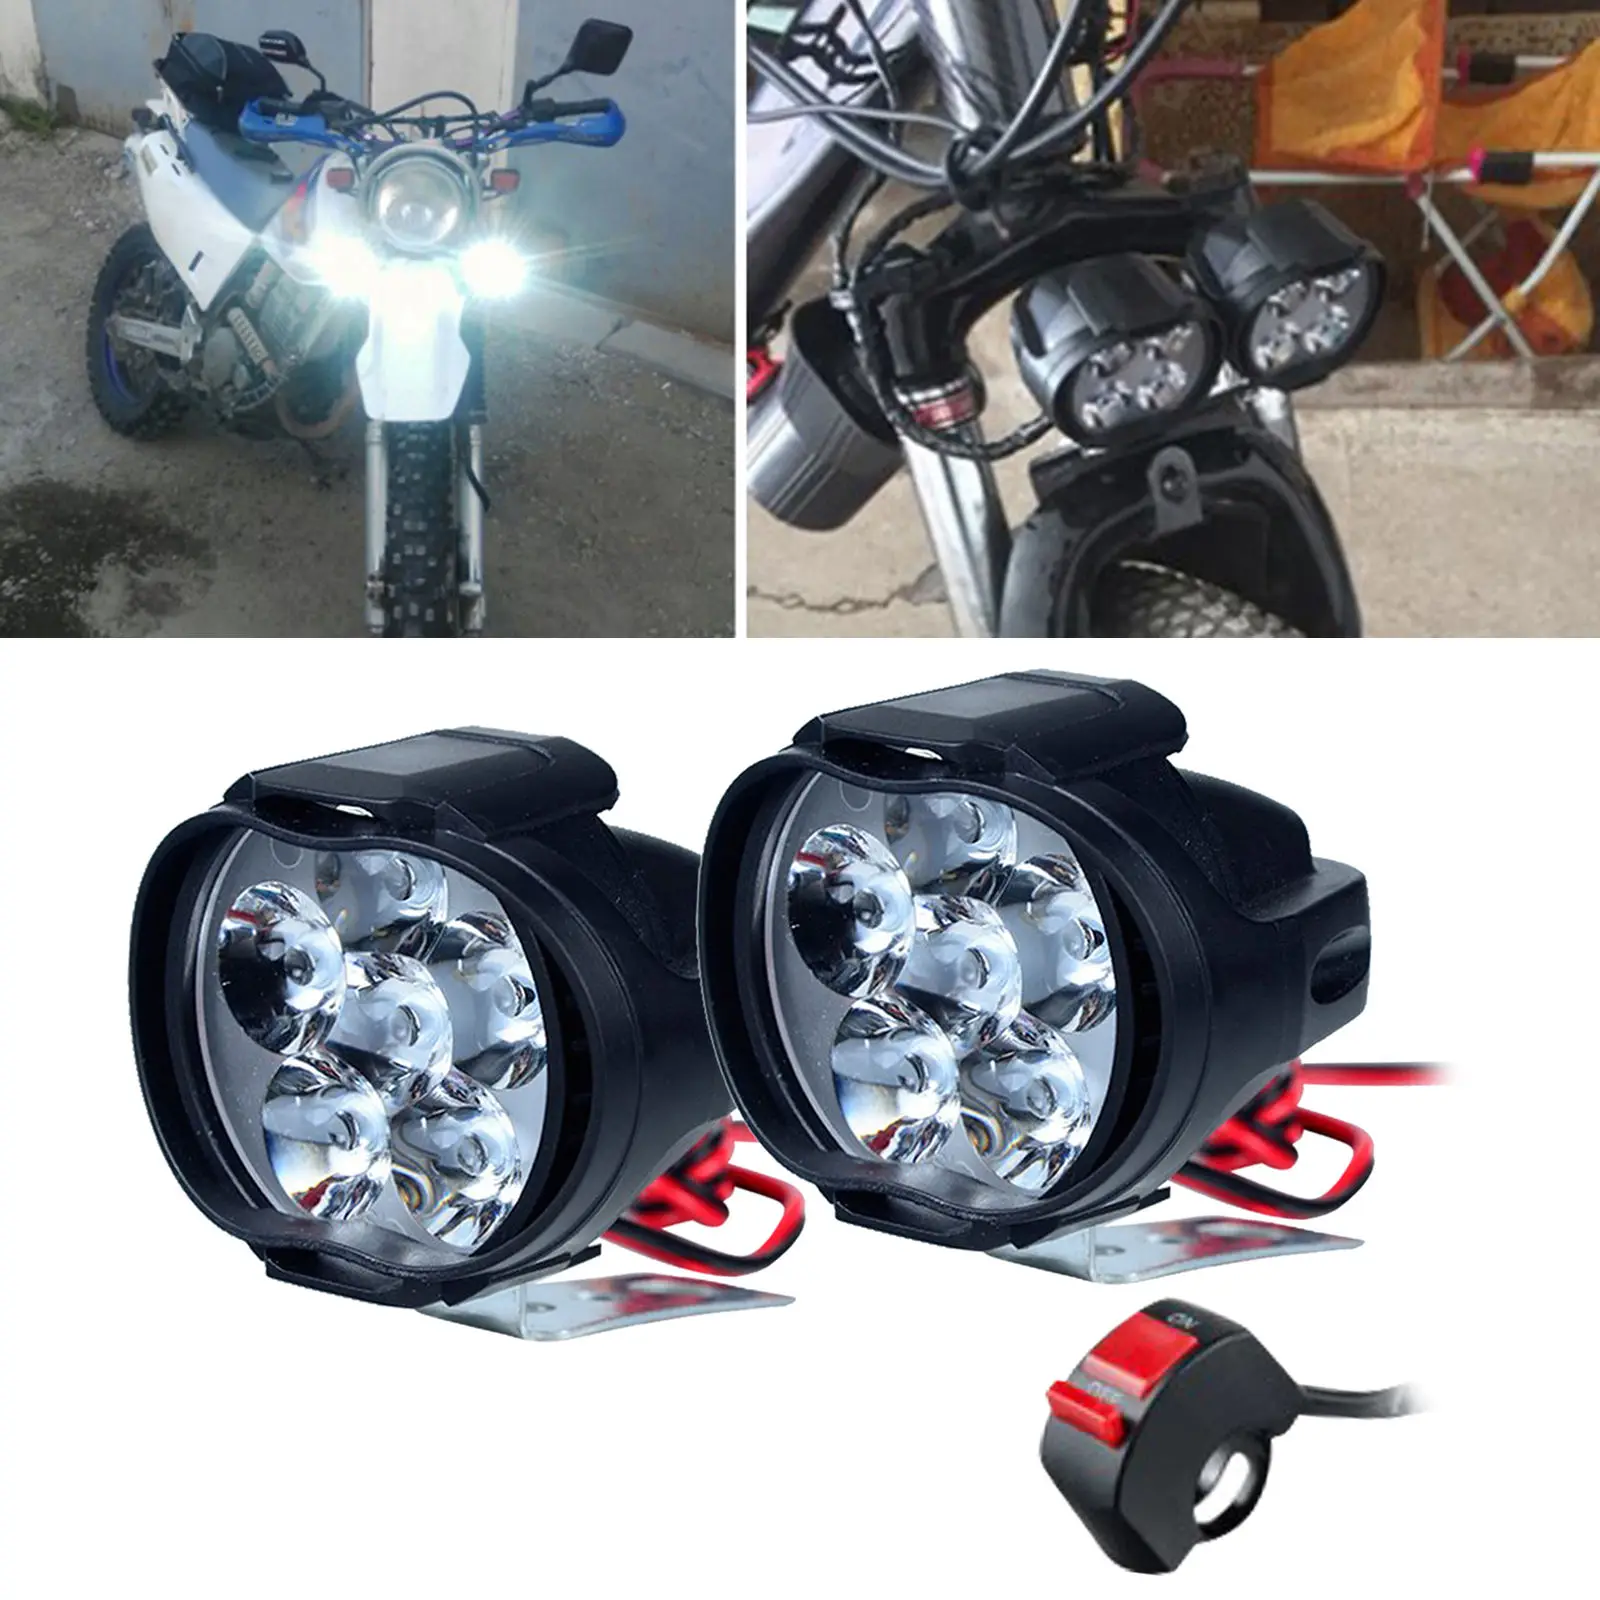 MovFlax Motorcycle E-bike LED Headlight 3 Modes 6 LEDs Bicycle Driving Lamp 12V-80V Fog Light For Motorbike Truck Car Boat Auxiliary Lights 